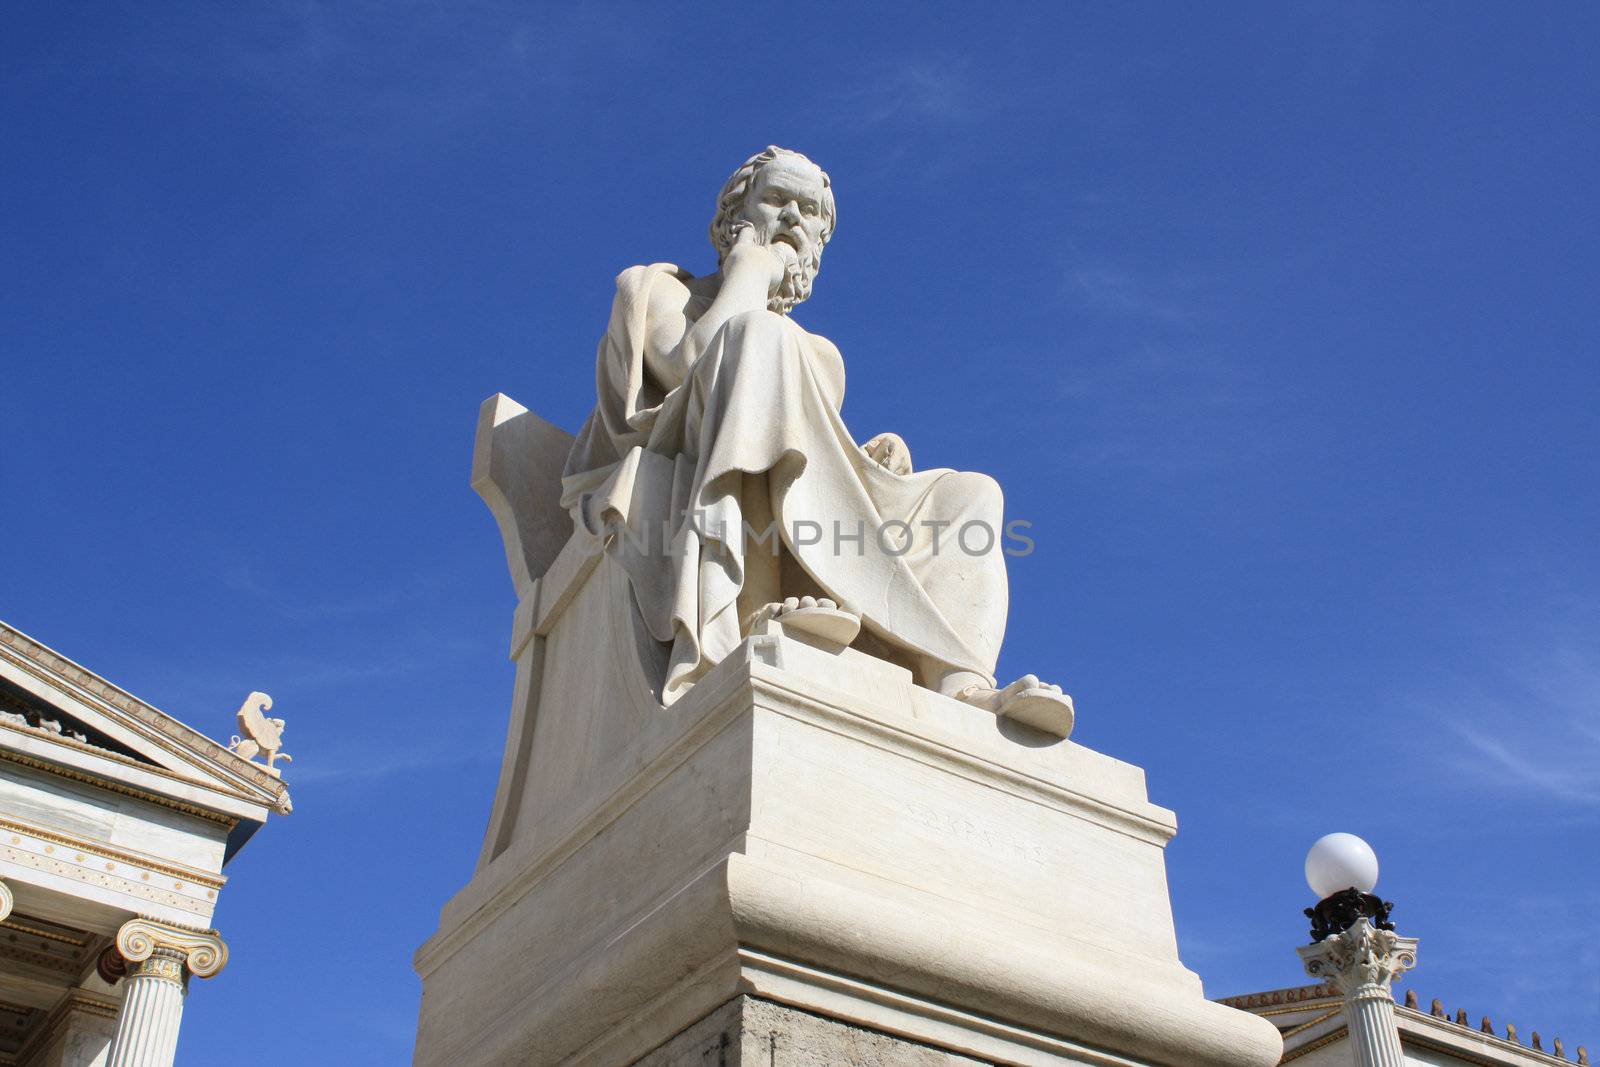 Neoclassical statue of ancient Greek philosopher, Socrates, outside Academy of Athens in Greece.